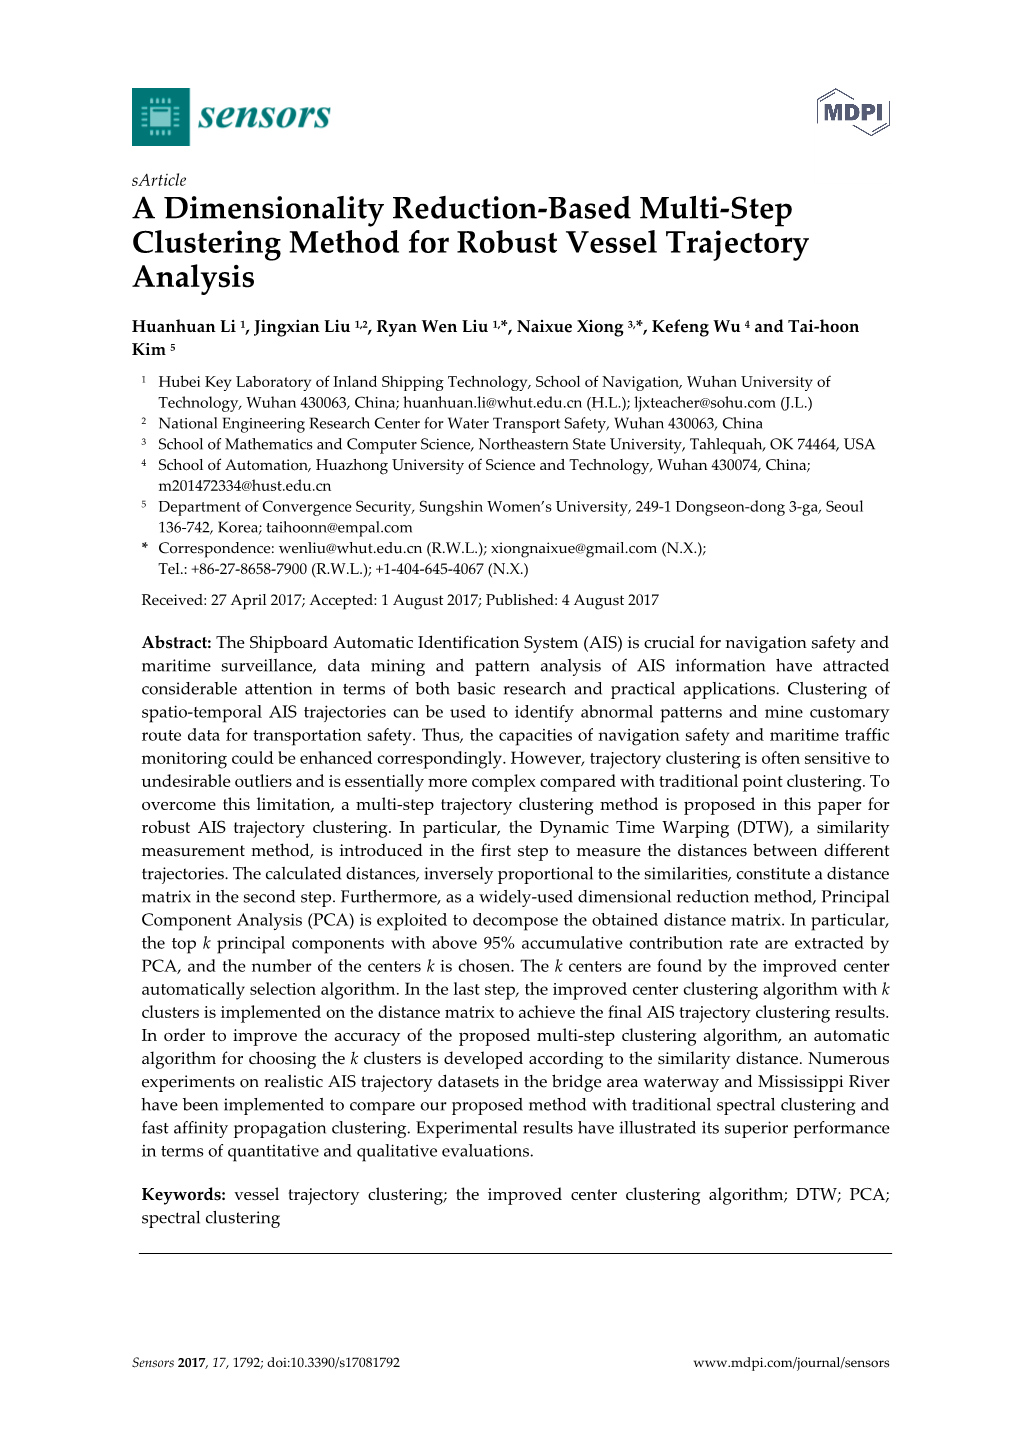 A Dimensionality Reduction-Based Multi-Step Clustering Method for Robust Vessel Trajectory Analysis